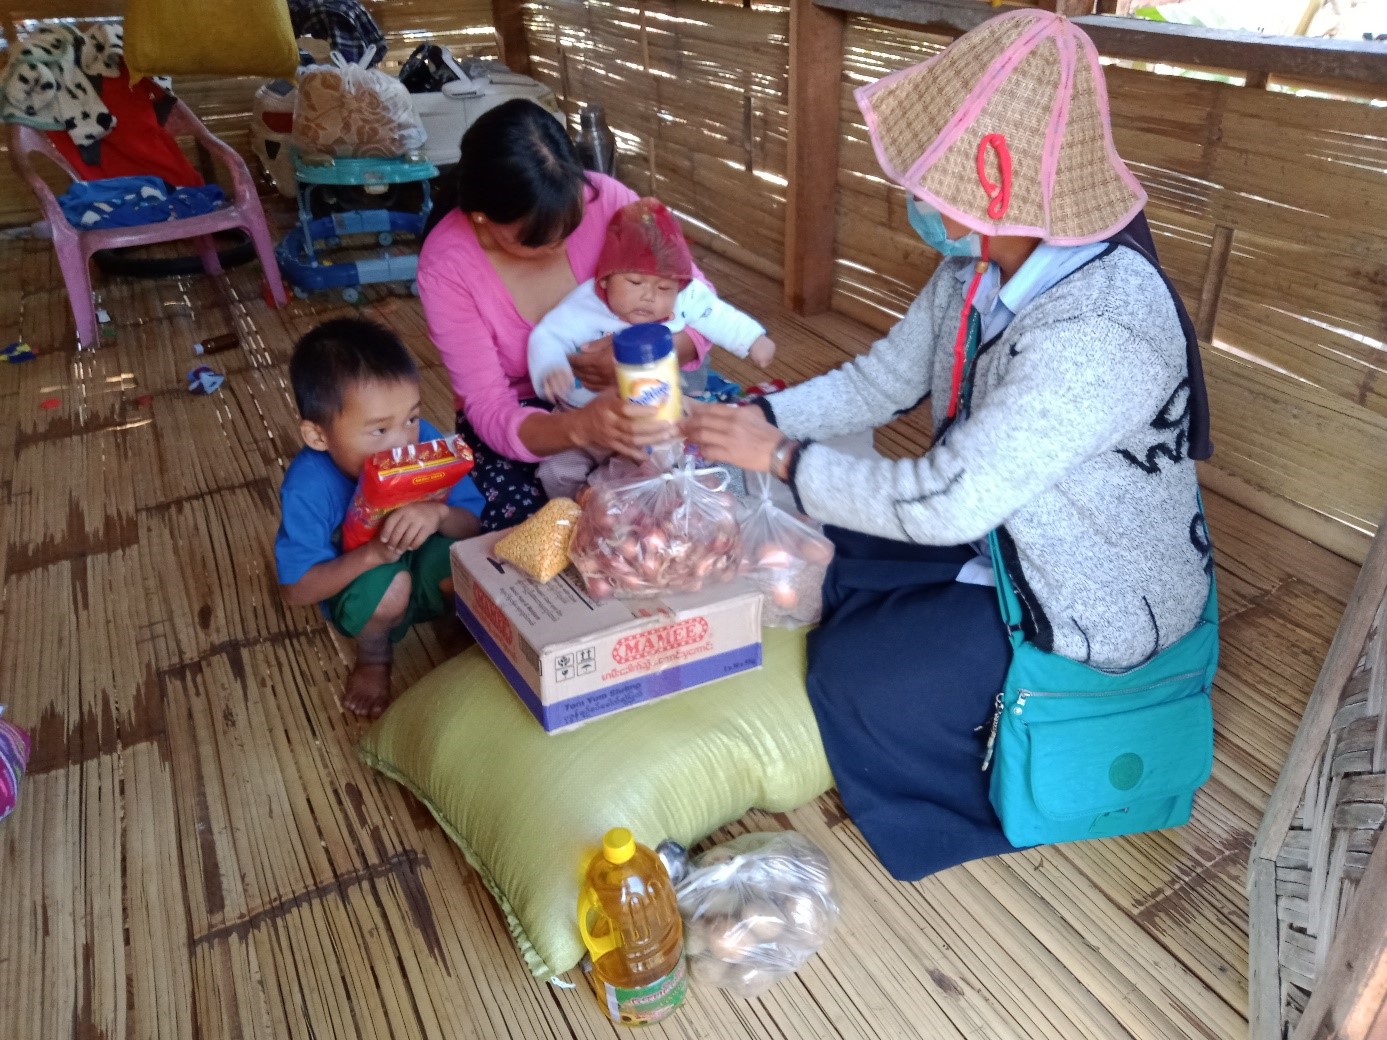 A family is being given food supply, Burma (Myanmar)